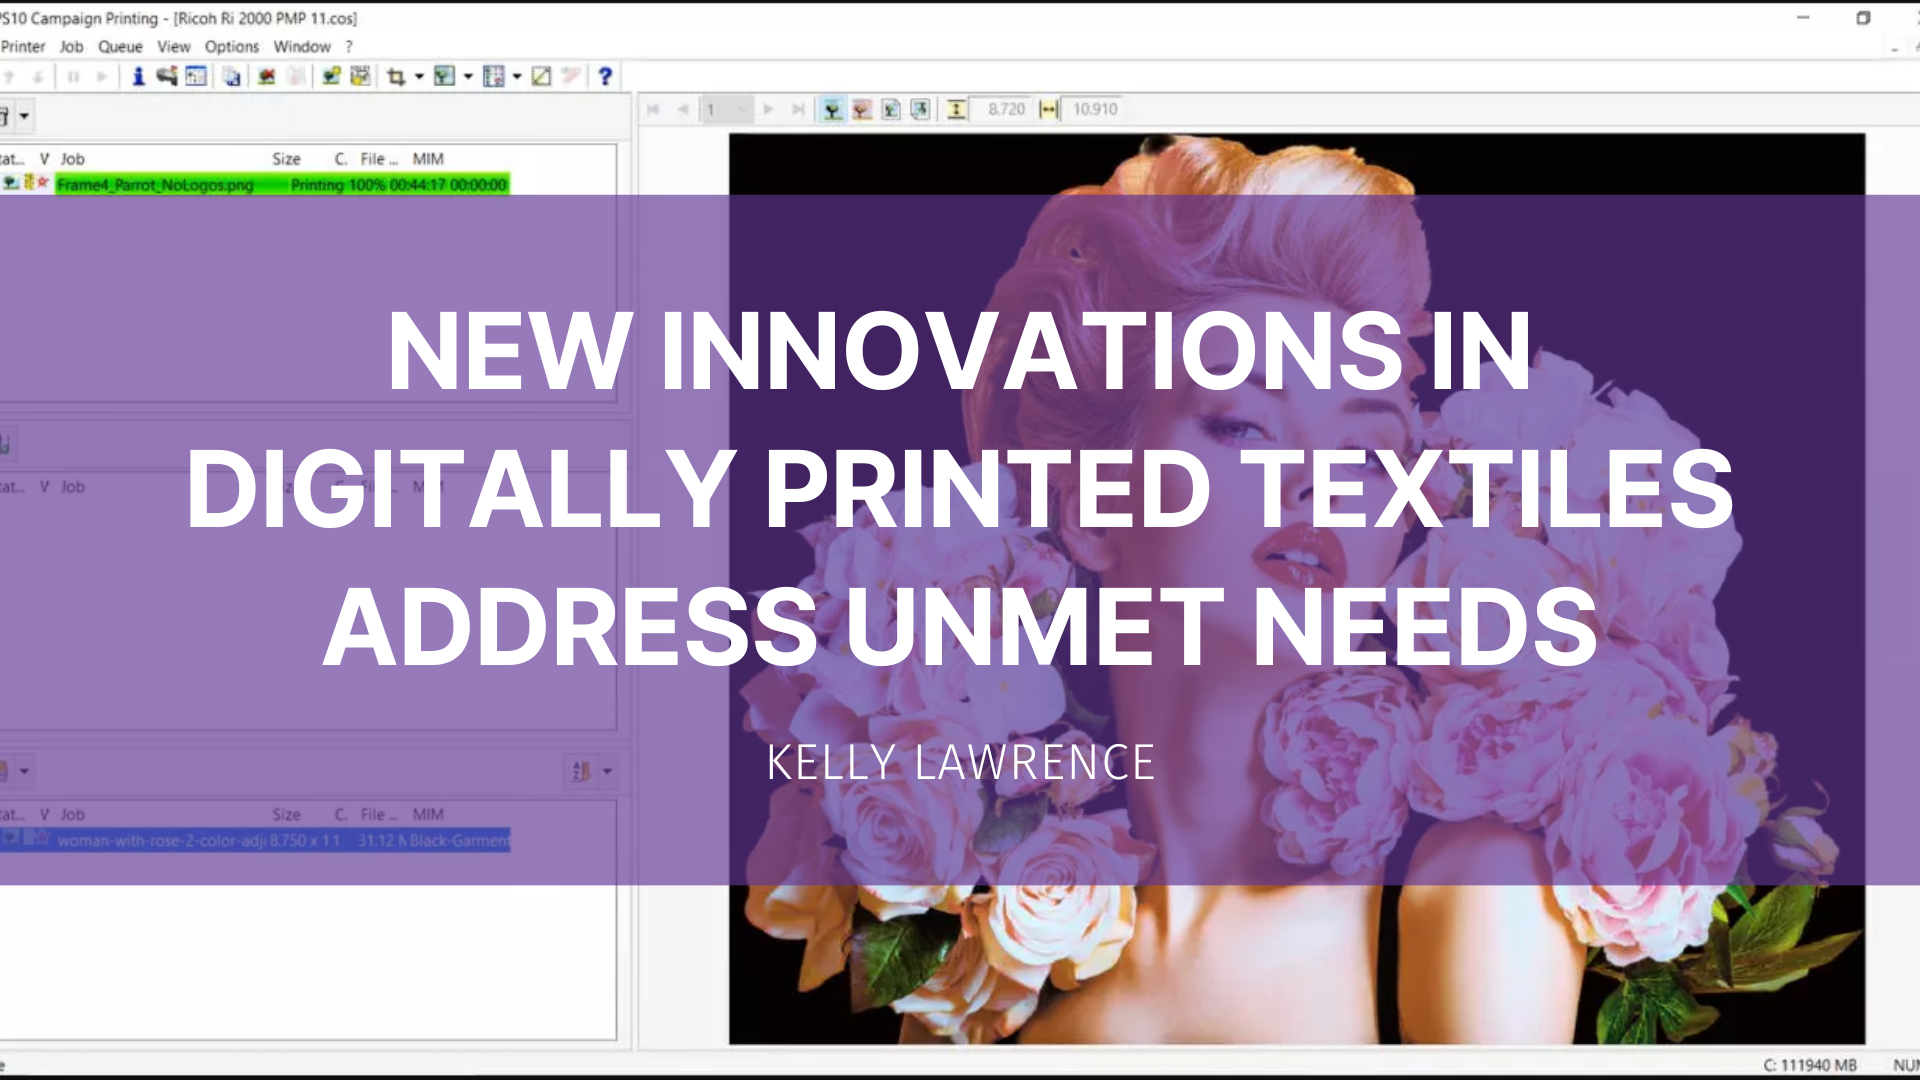 Featured image for “New innovations in digitally printed textiles address unmet needs”